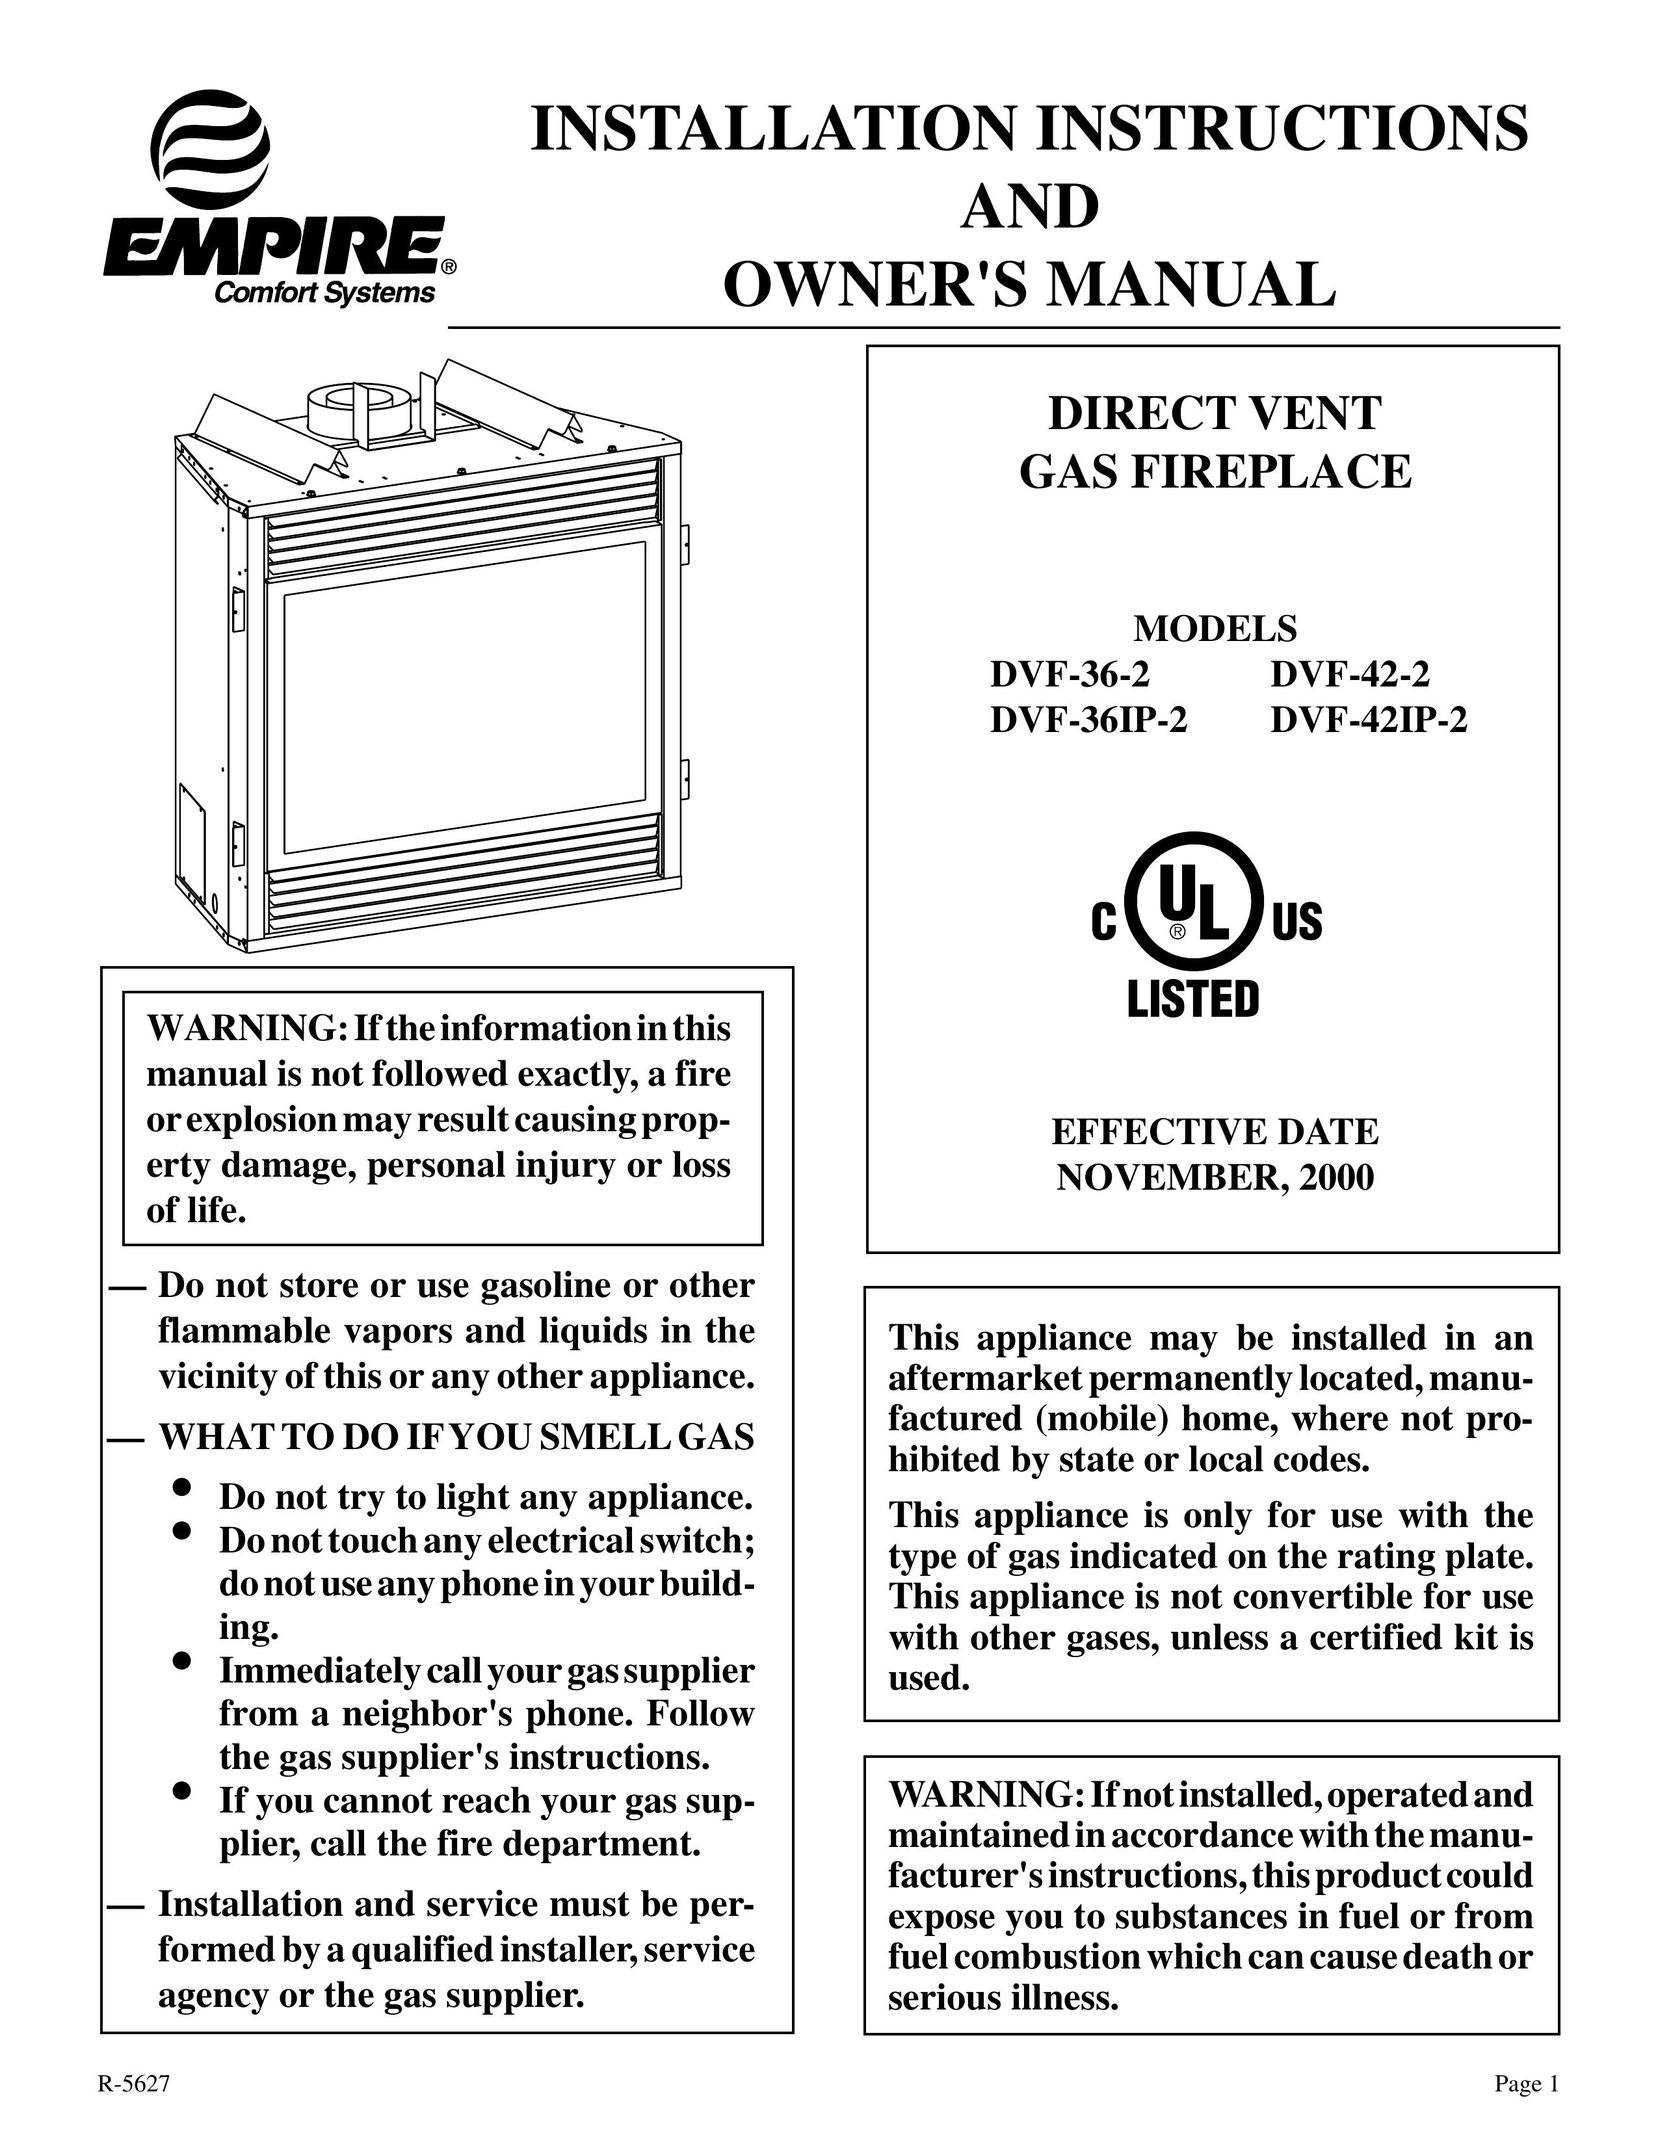 Empire Comfort Systems DVF-42-2 Indoor Fireplace User Manual